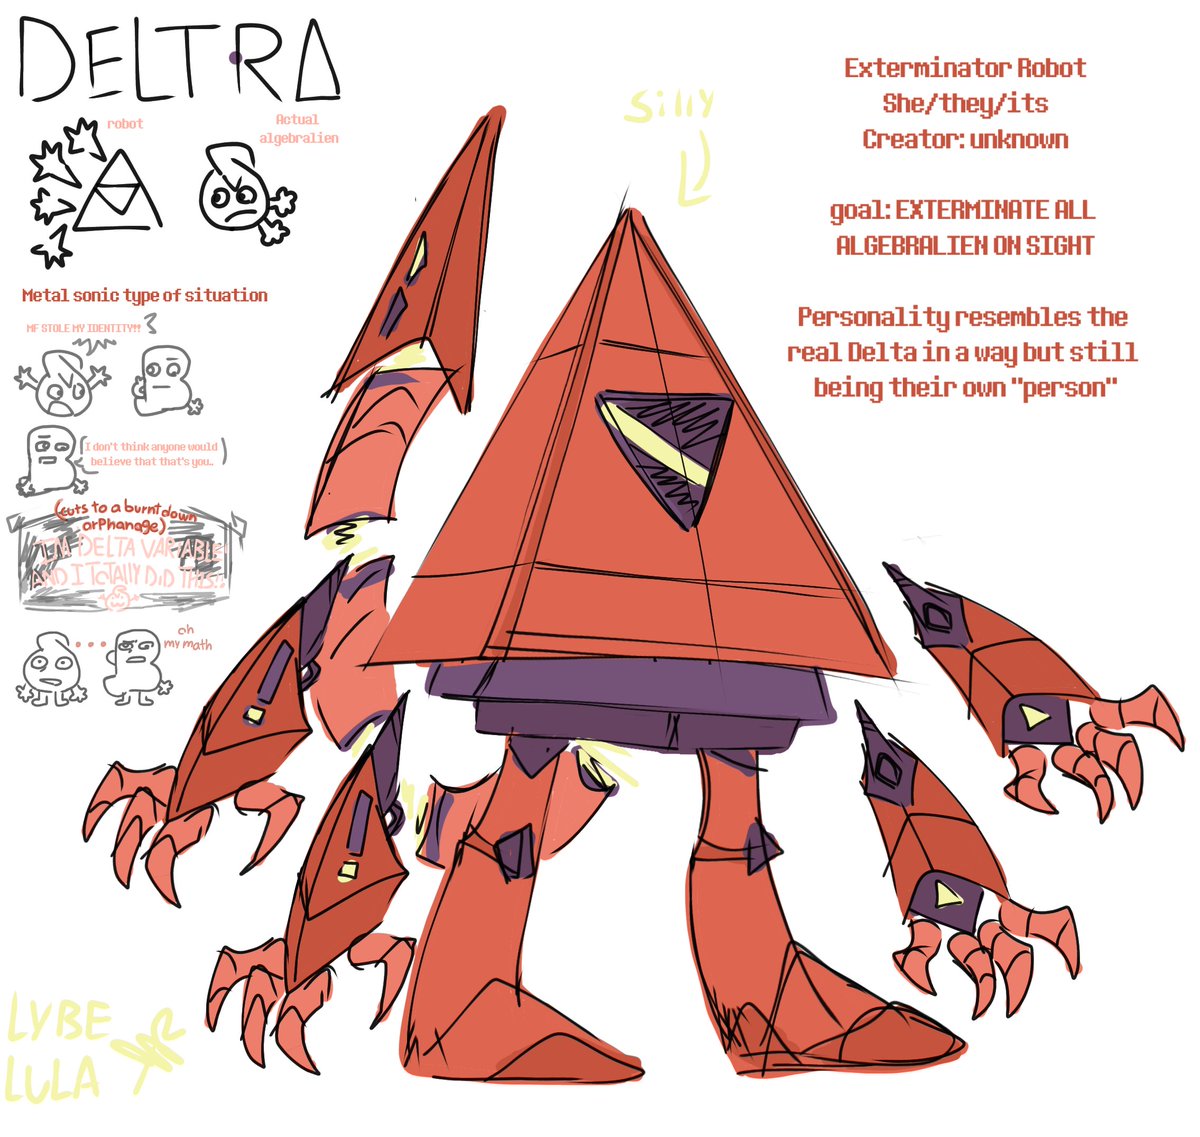 Concept desing for a uhh.. 'algebralien' oc (not really *schock*)

What do u all think?? :D